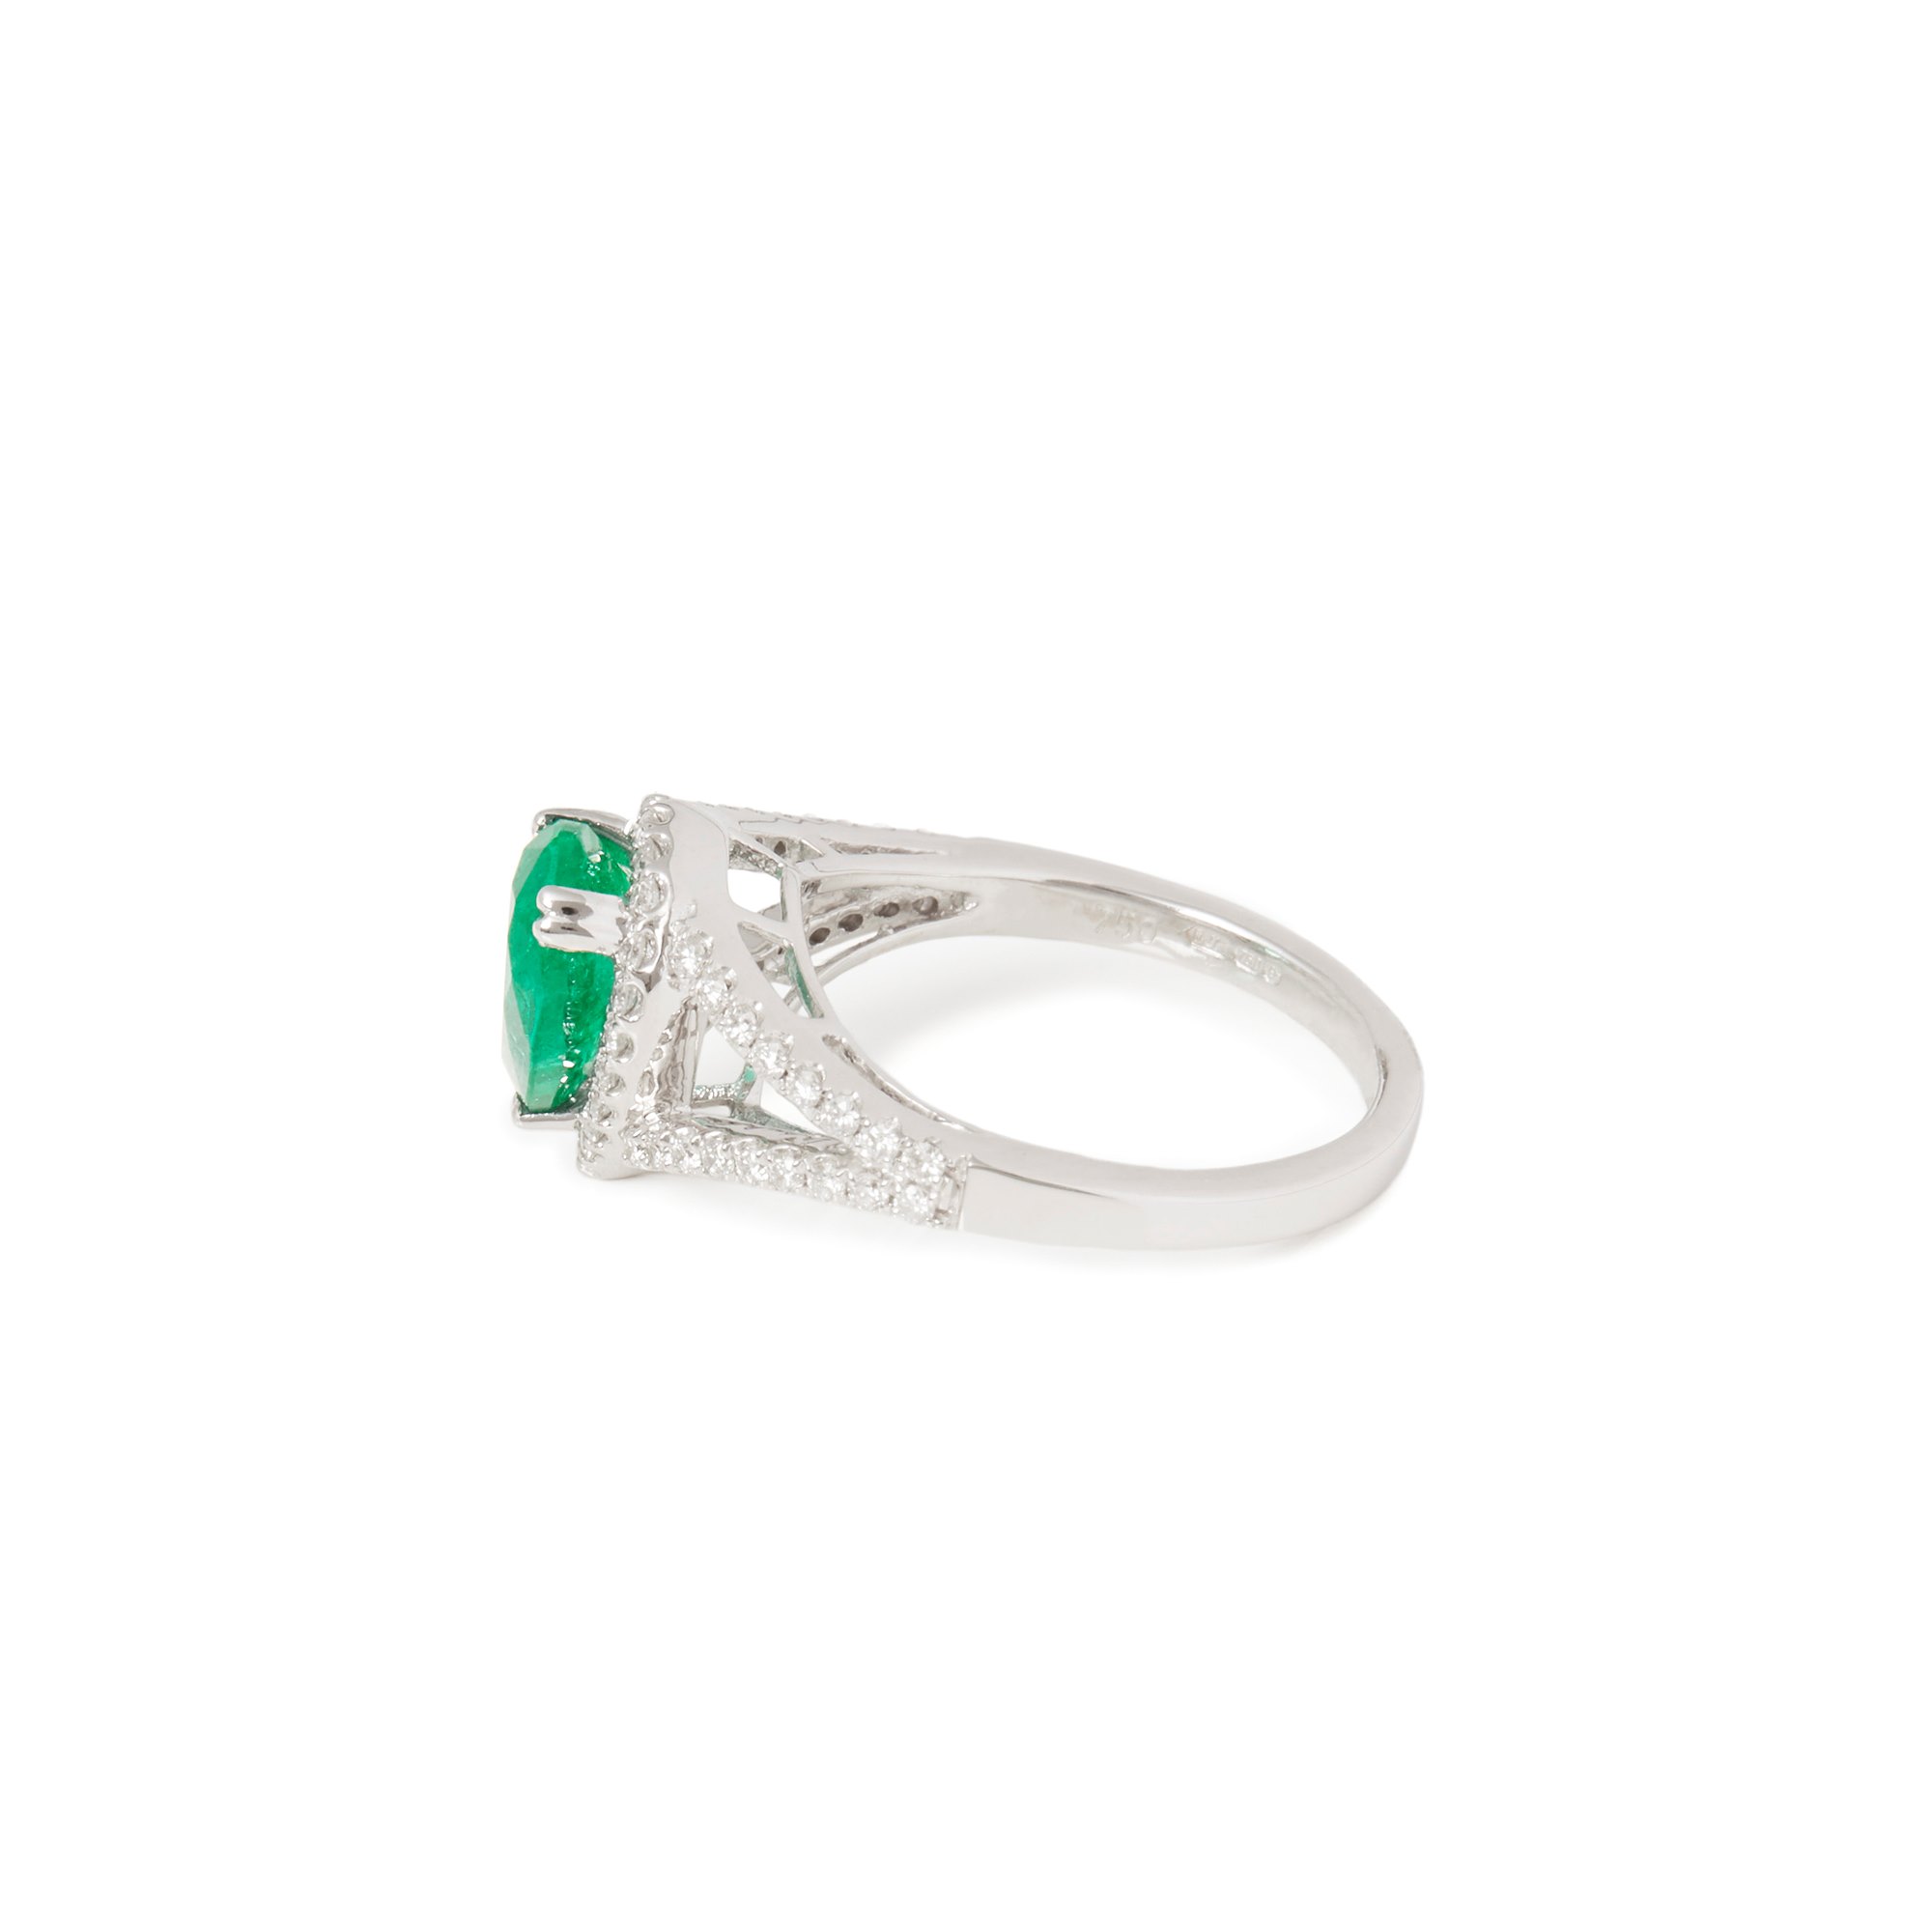 David Jerome Certified 1.57ct Untreated Colombian Pear Cut Emerald and Diamond 18ct gold Ring